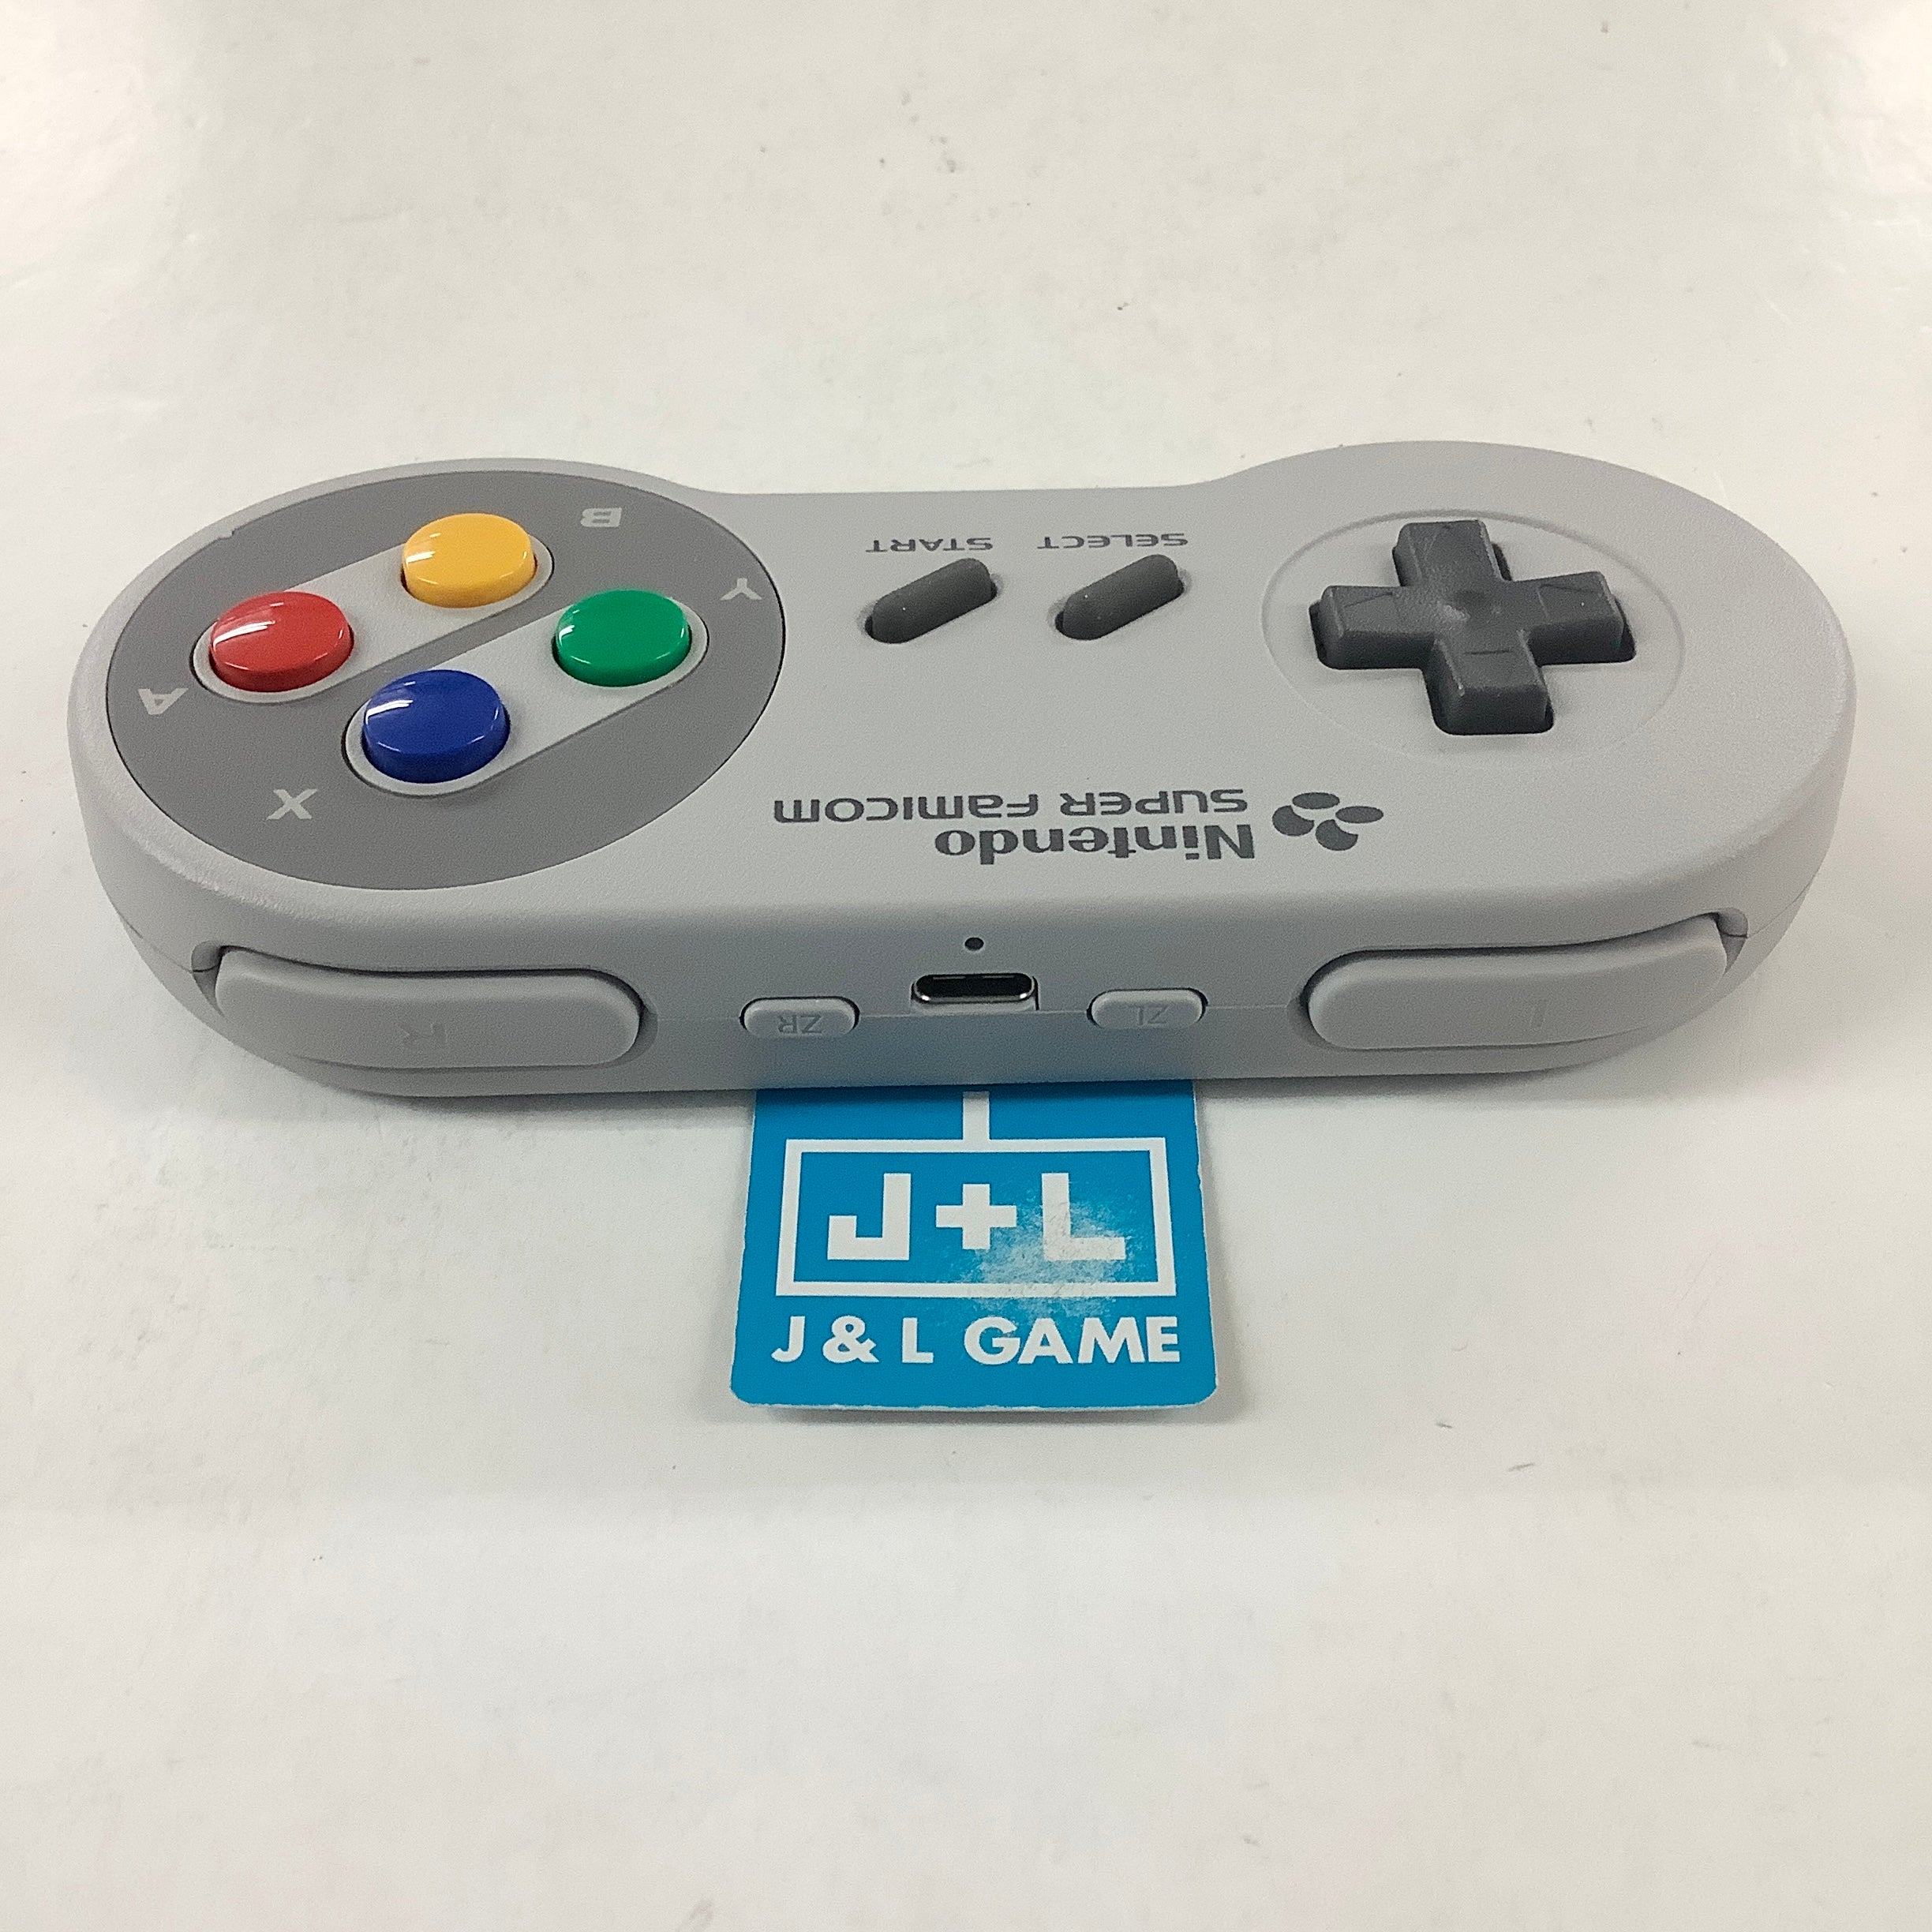 Nintendo Switch Online Super Famicom Controller - (NSW) Nintendo Switch [Pre-Owned] (Japanese Import) Accessories Nintendo   